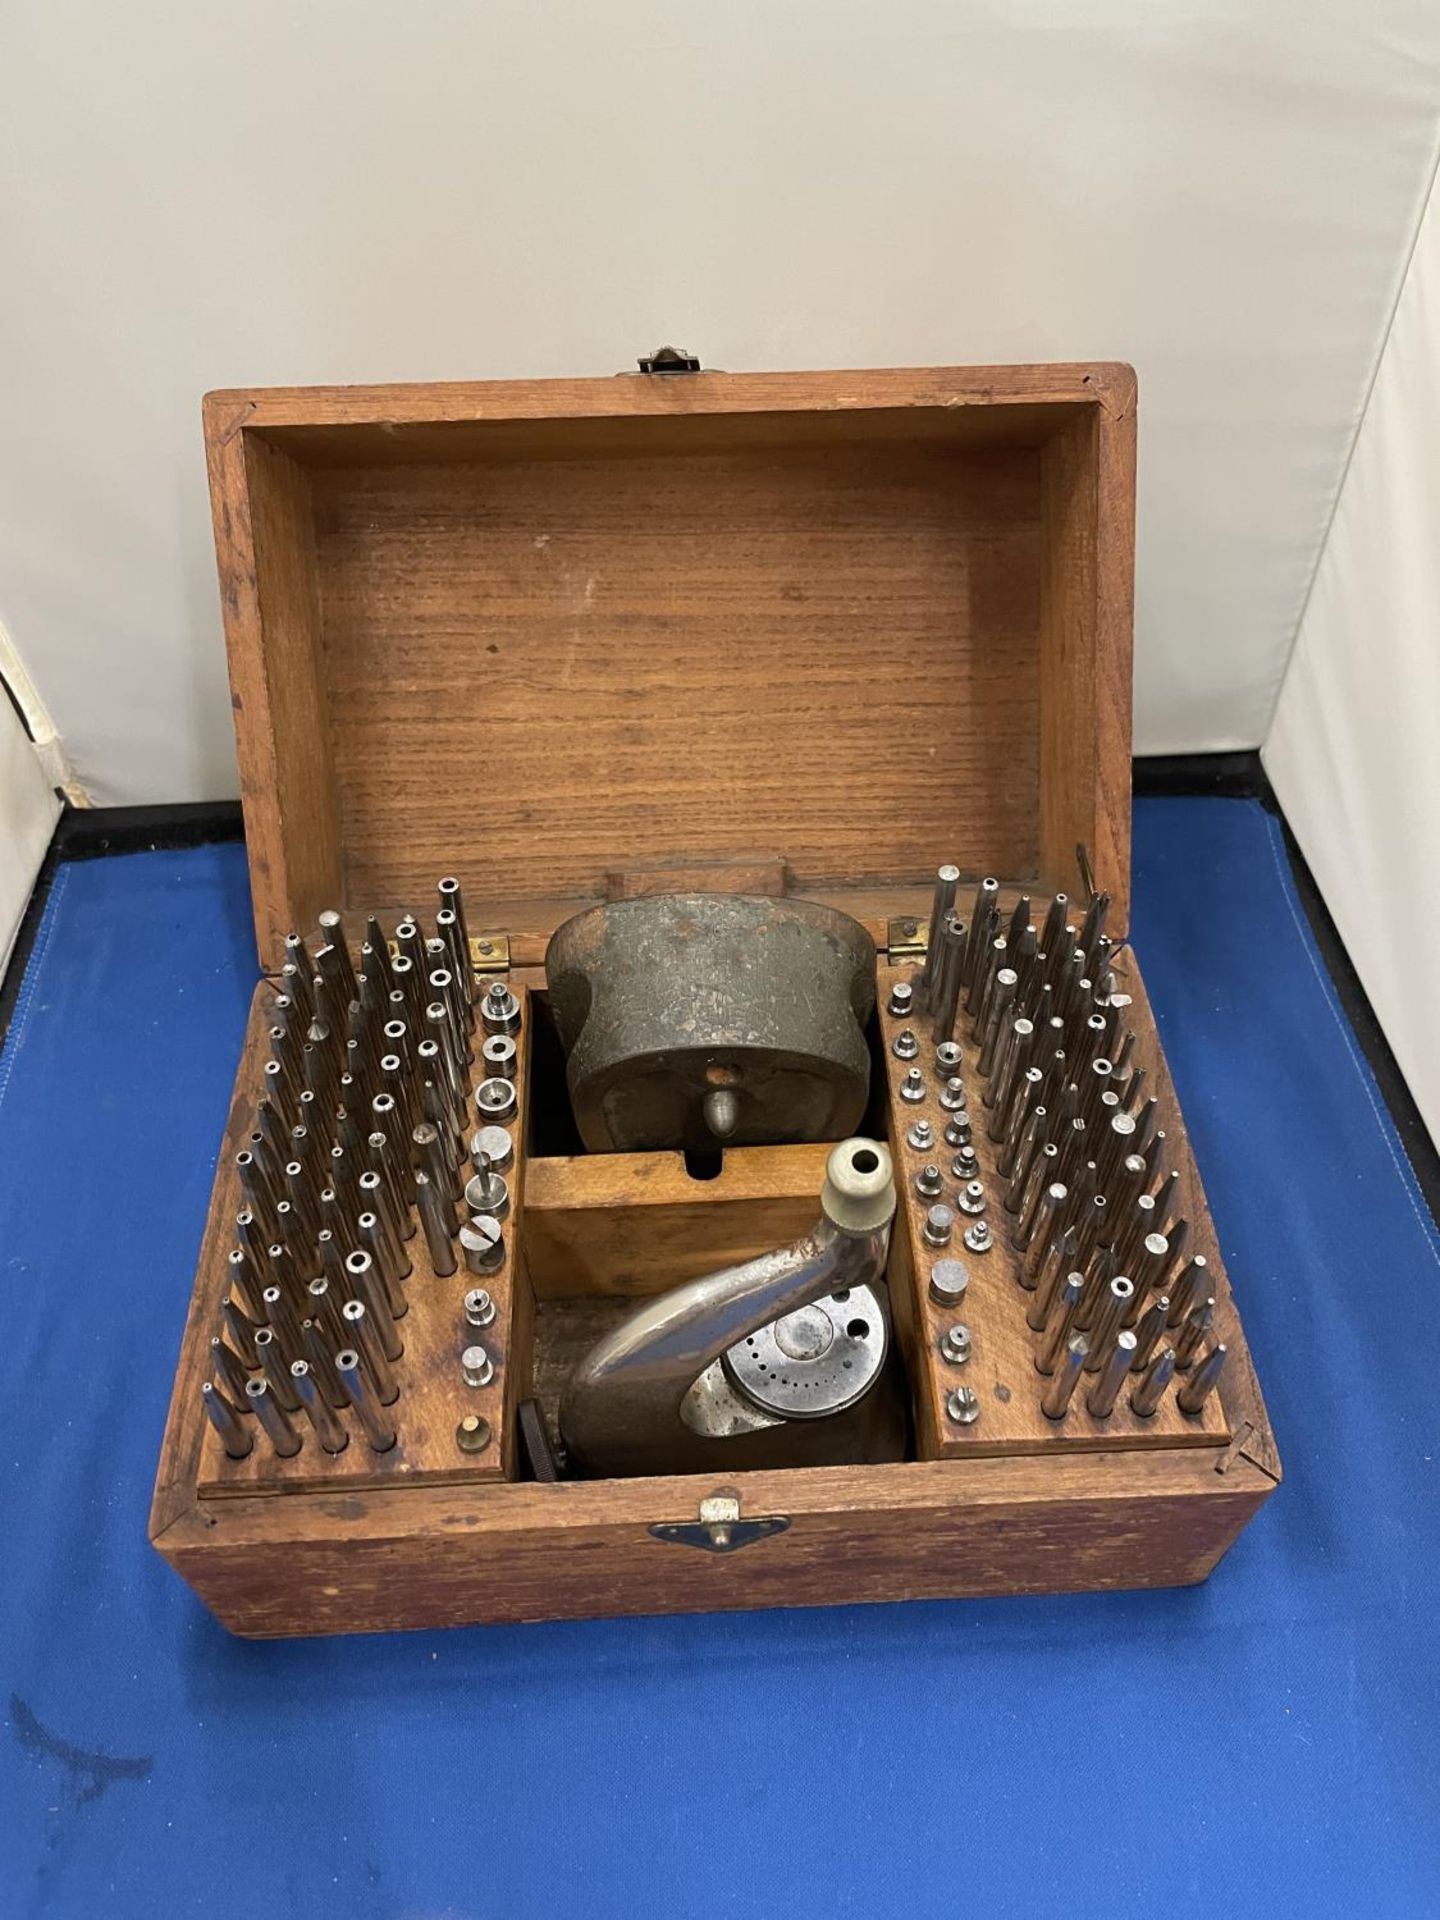 A BOLEY WATCHMAKERS RIVETING AND STAKING TOOLS (COMPLETE SET) IN ORIGINAL WOODEN BOX - Image 4 of 14